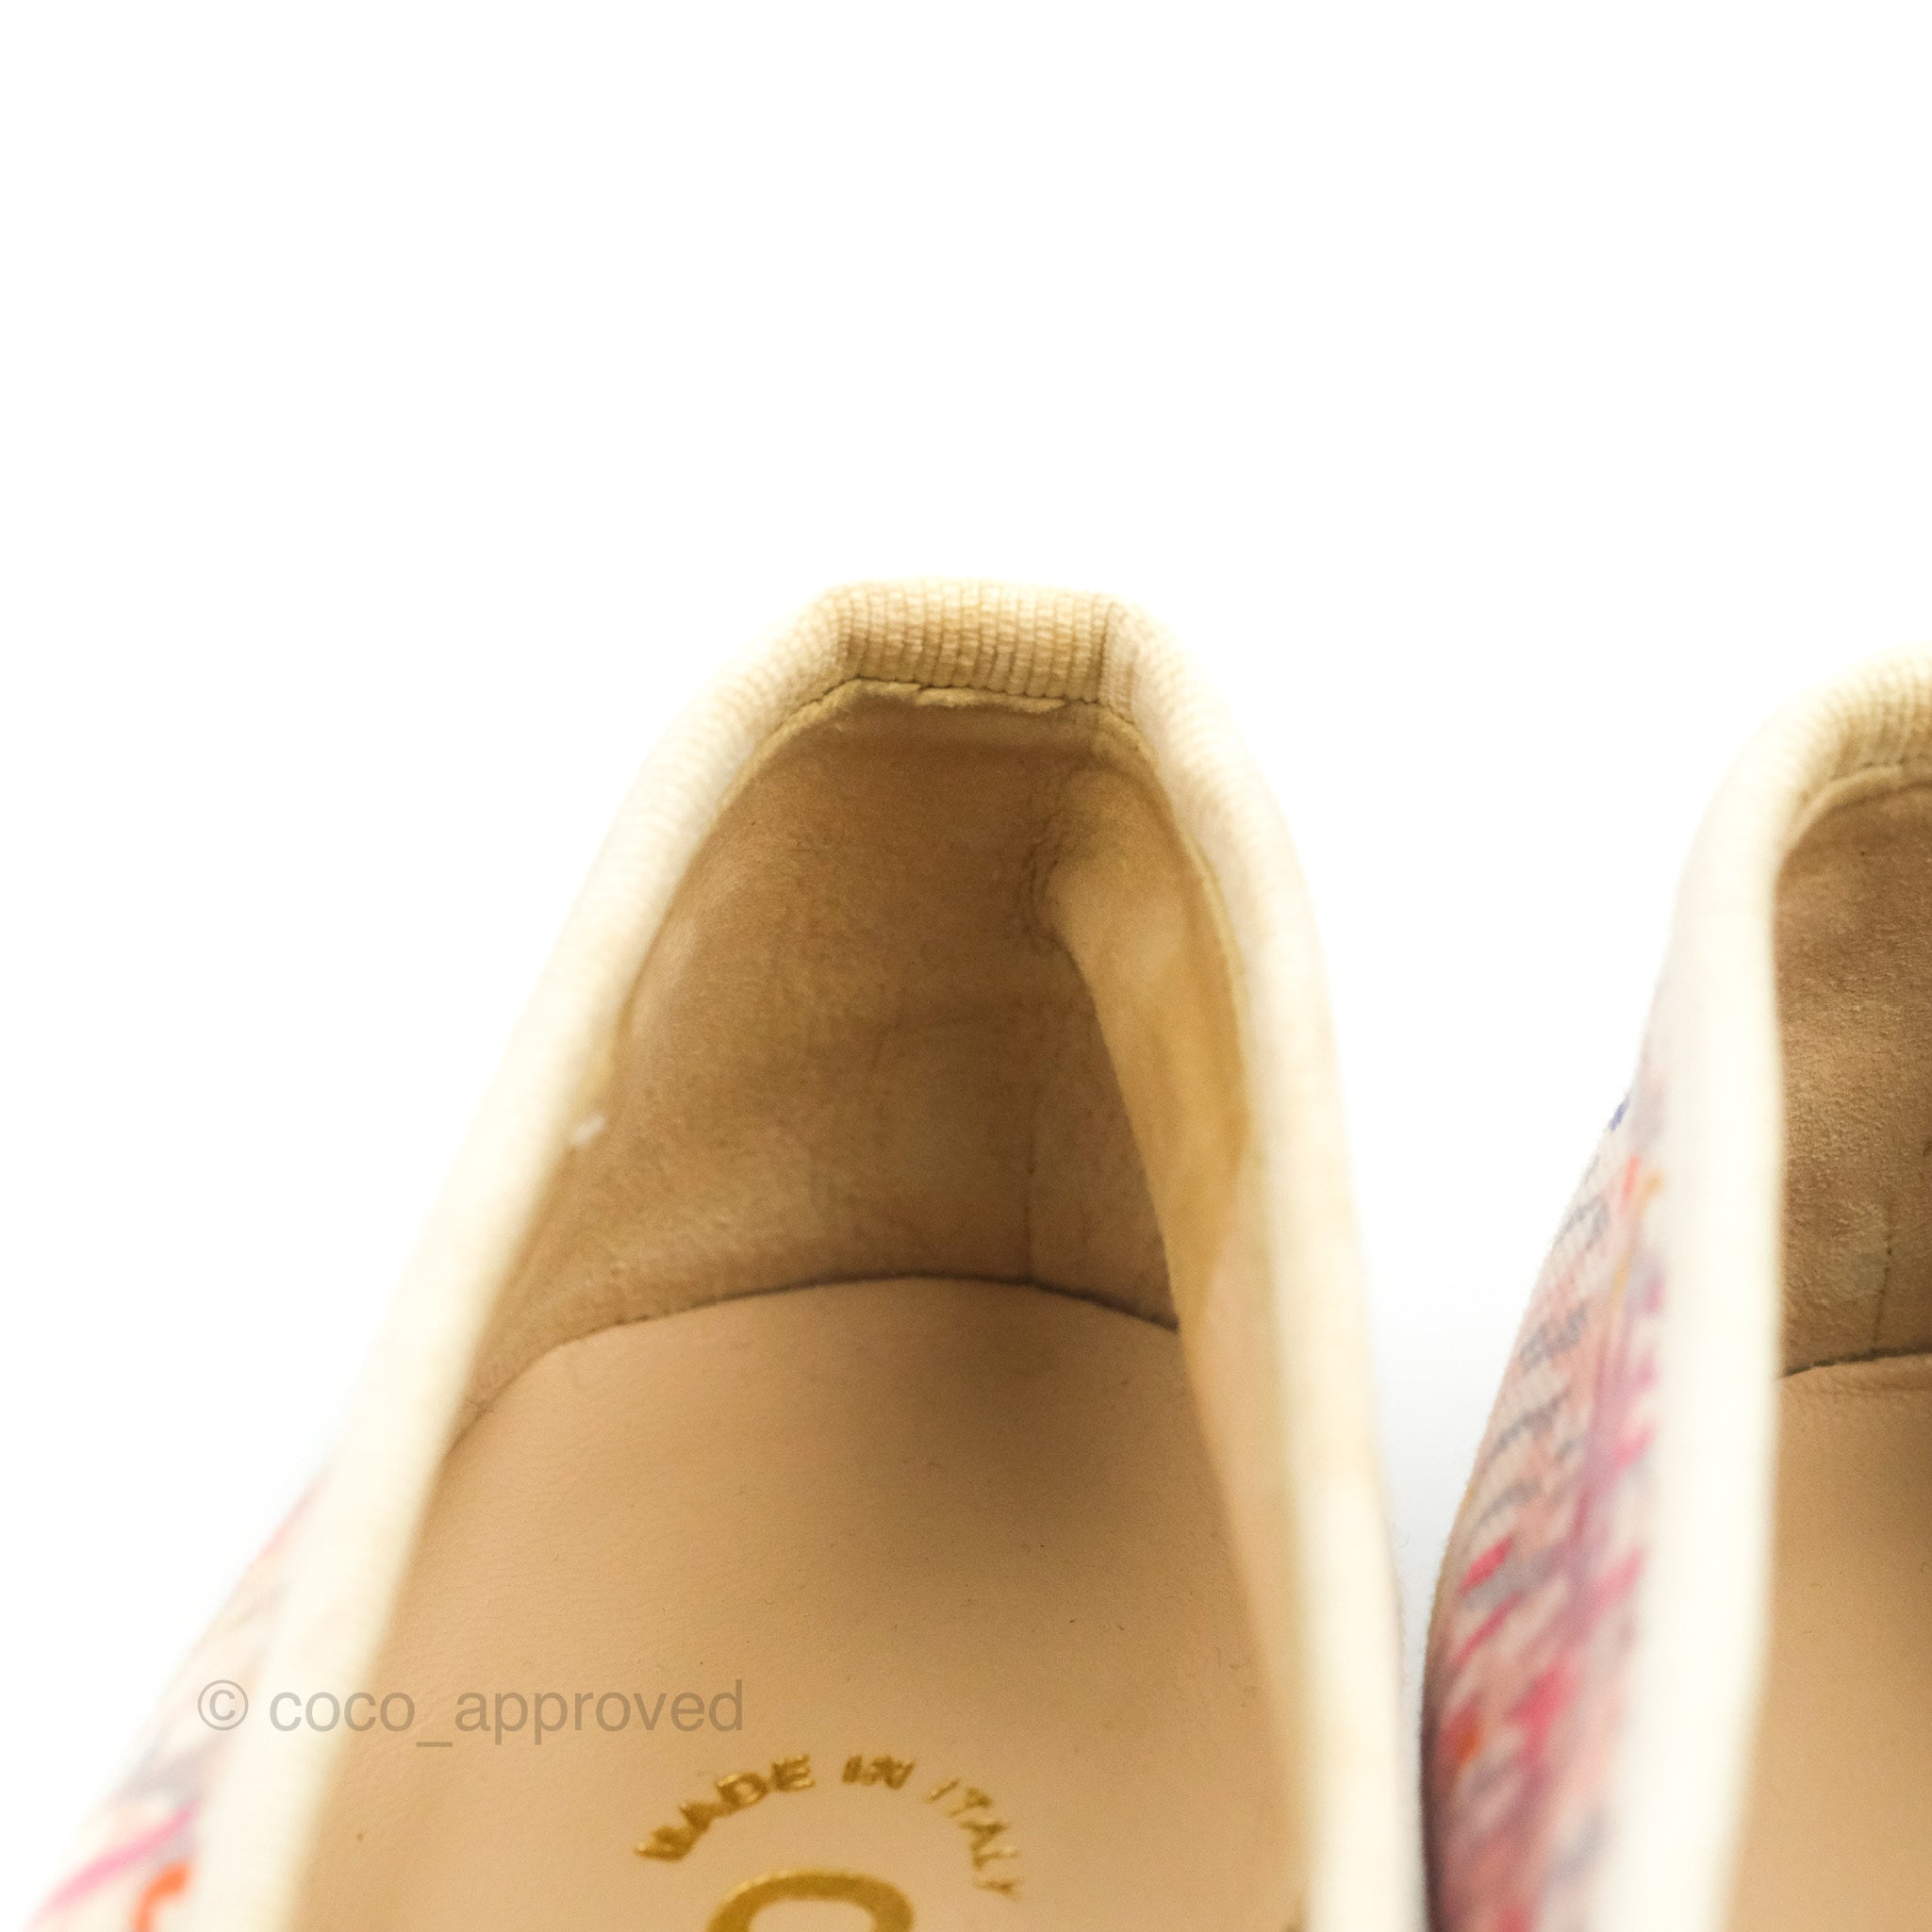 Chanel Ballerina Flats Pink/White Size 36 – Coco Approved Studio